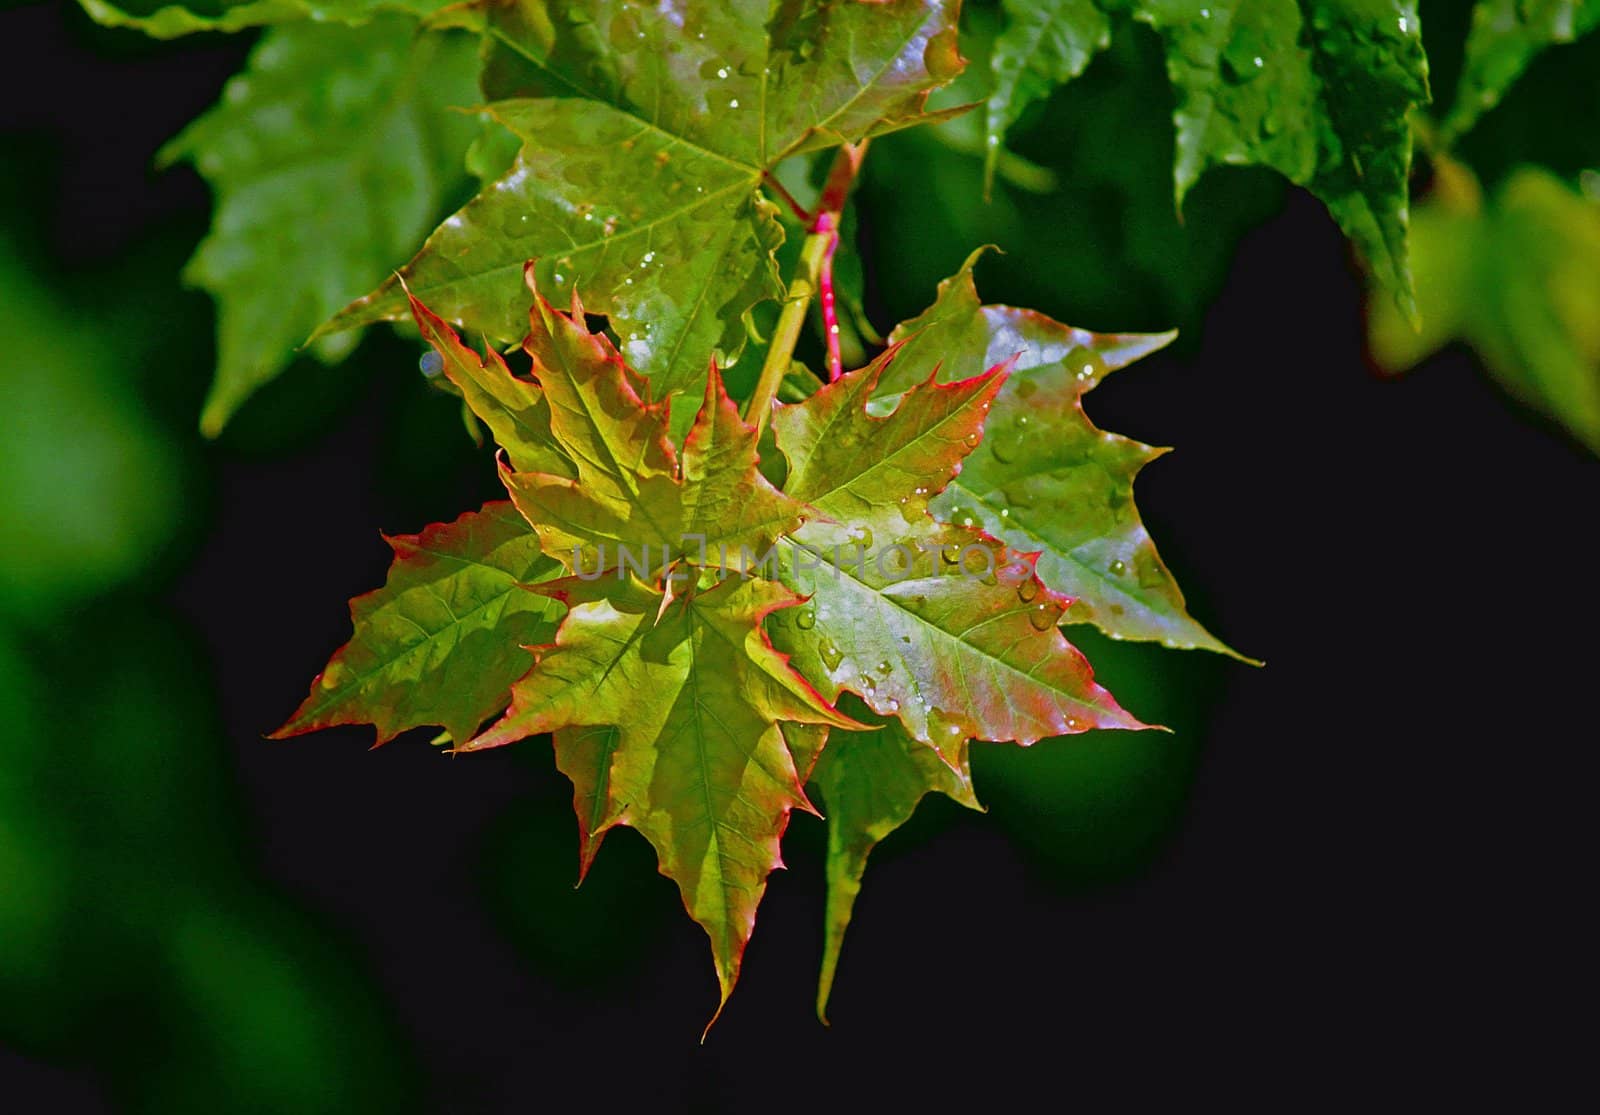 Immature maple leaves after raining, the dew of youth by mulden